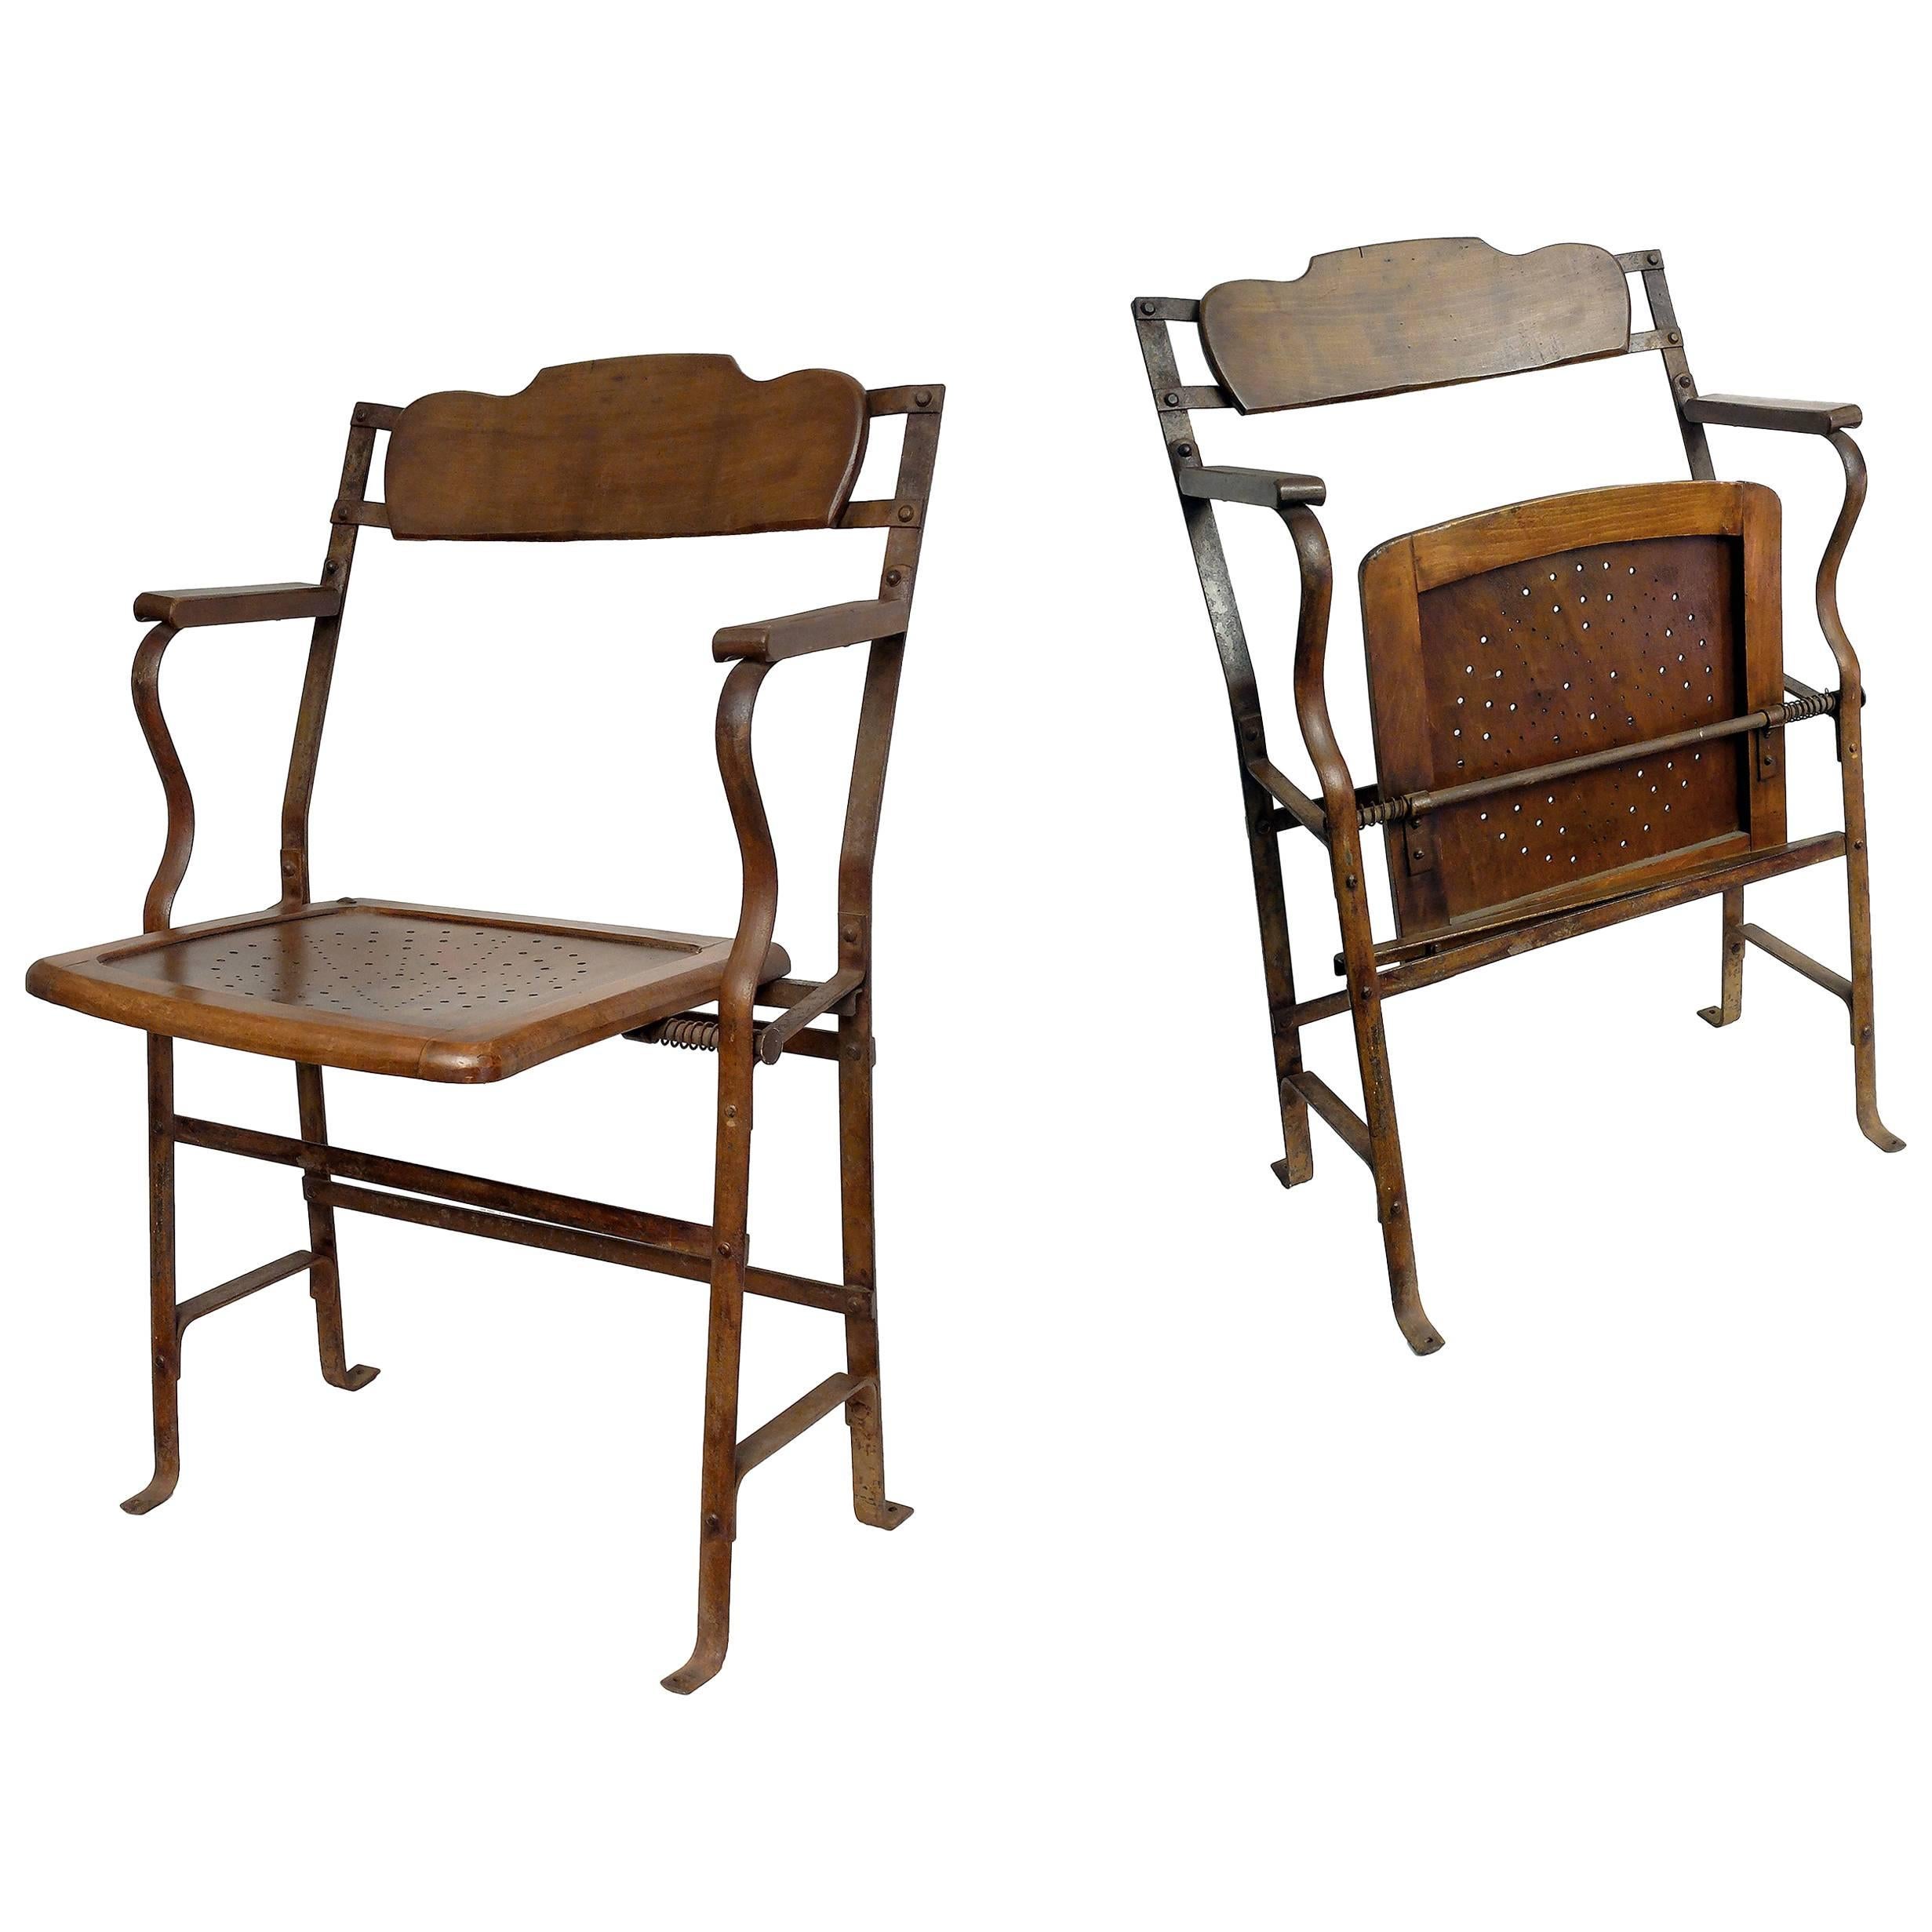 Two Theatre Chairs, Wood and Iron, France, circa 1920